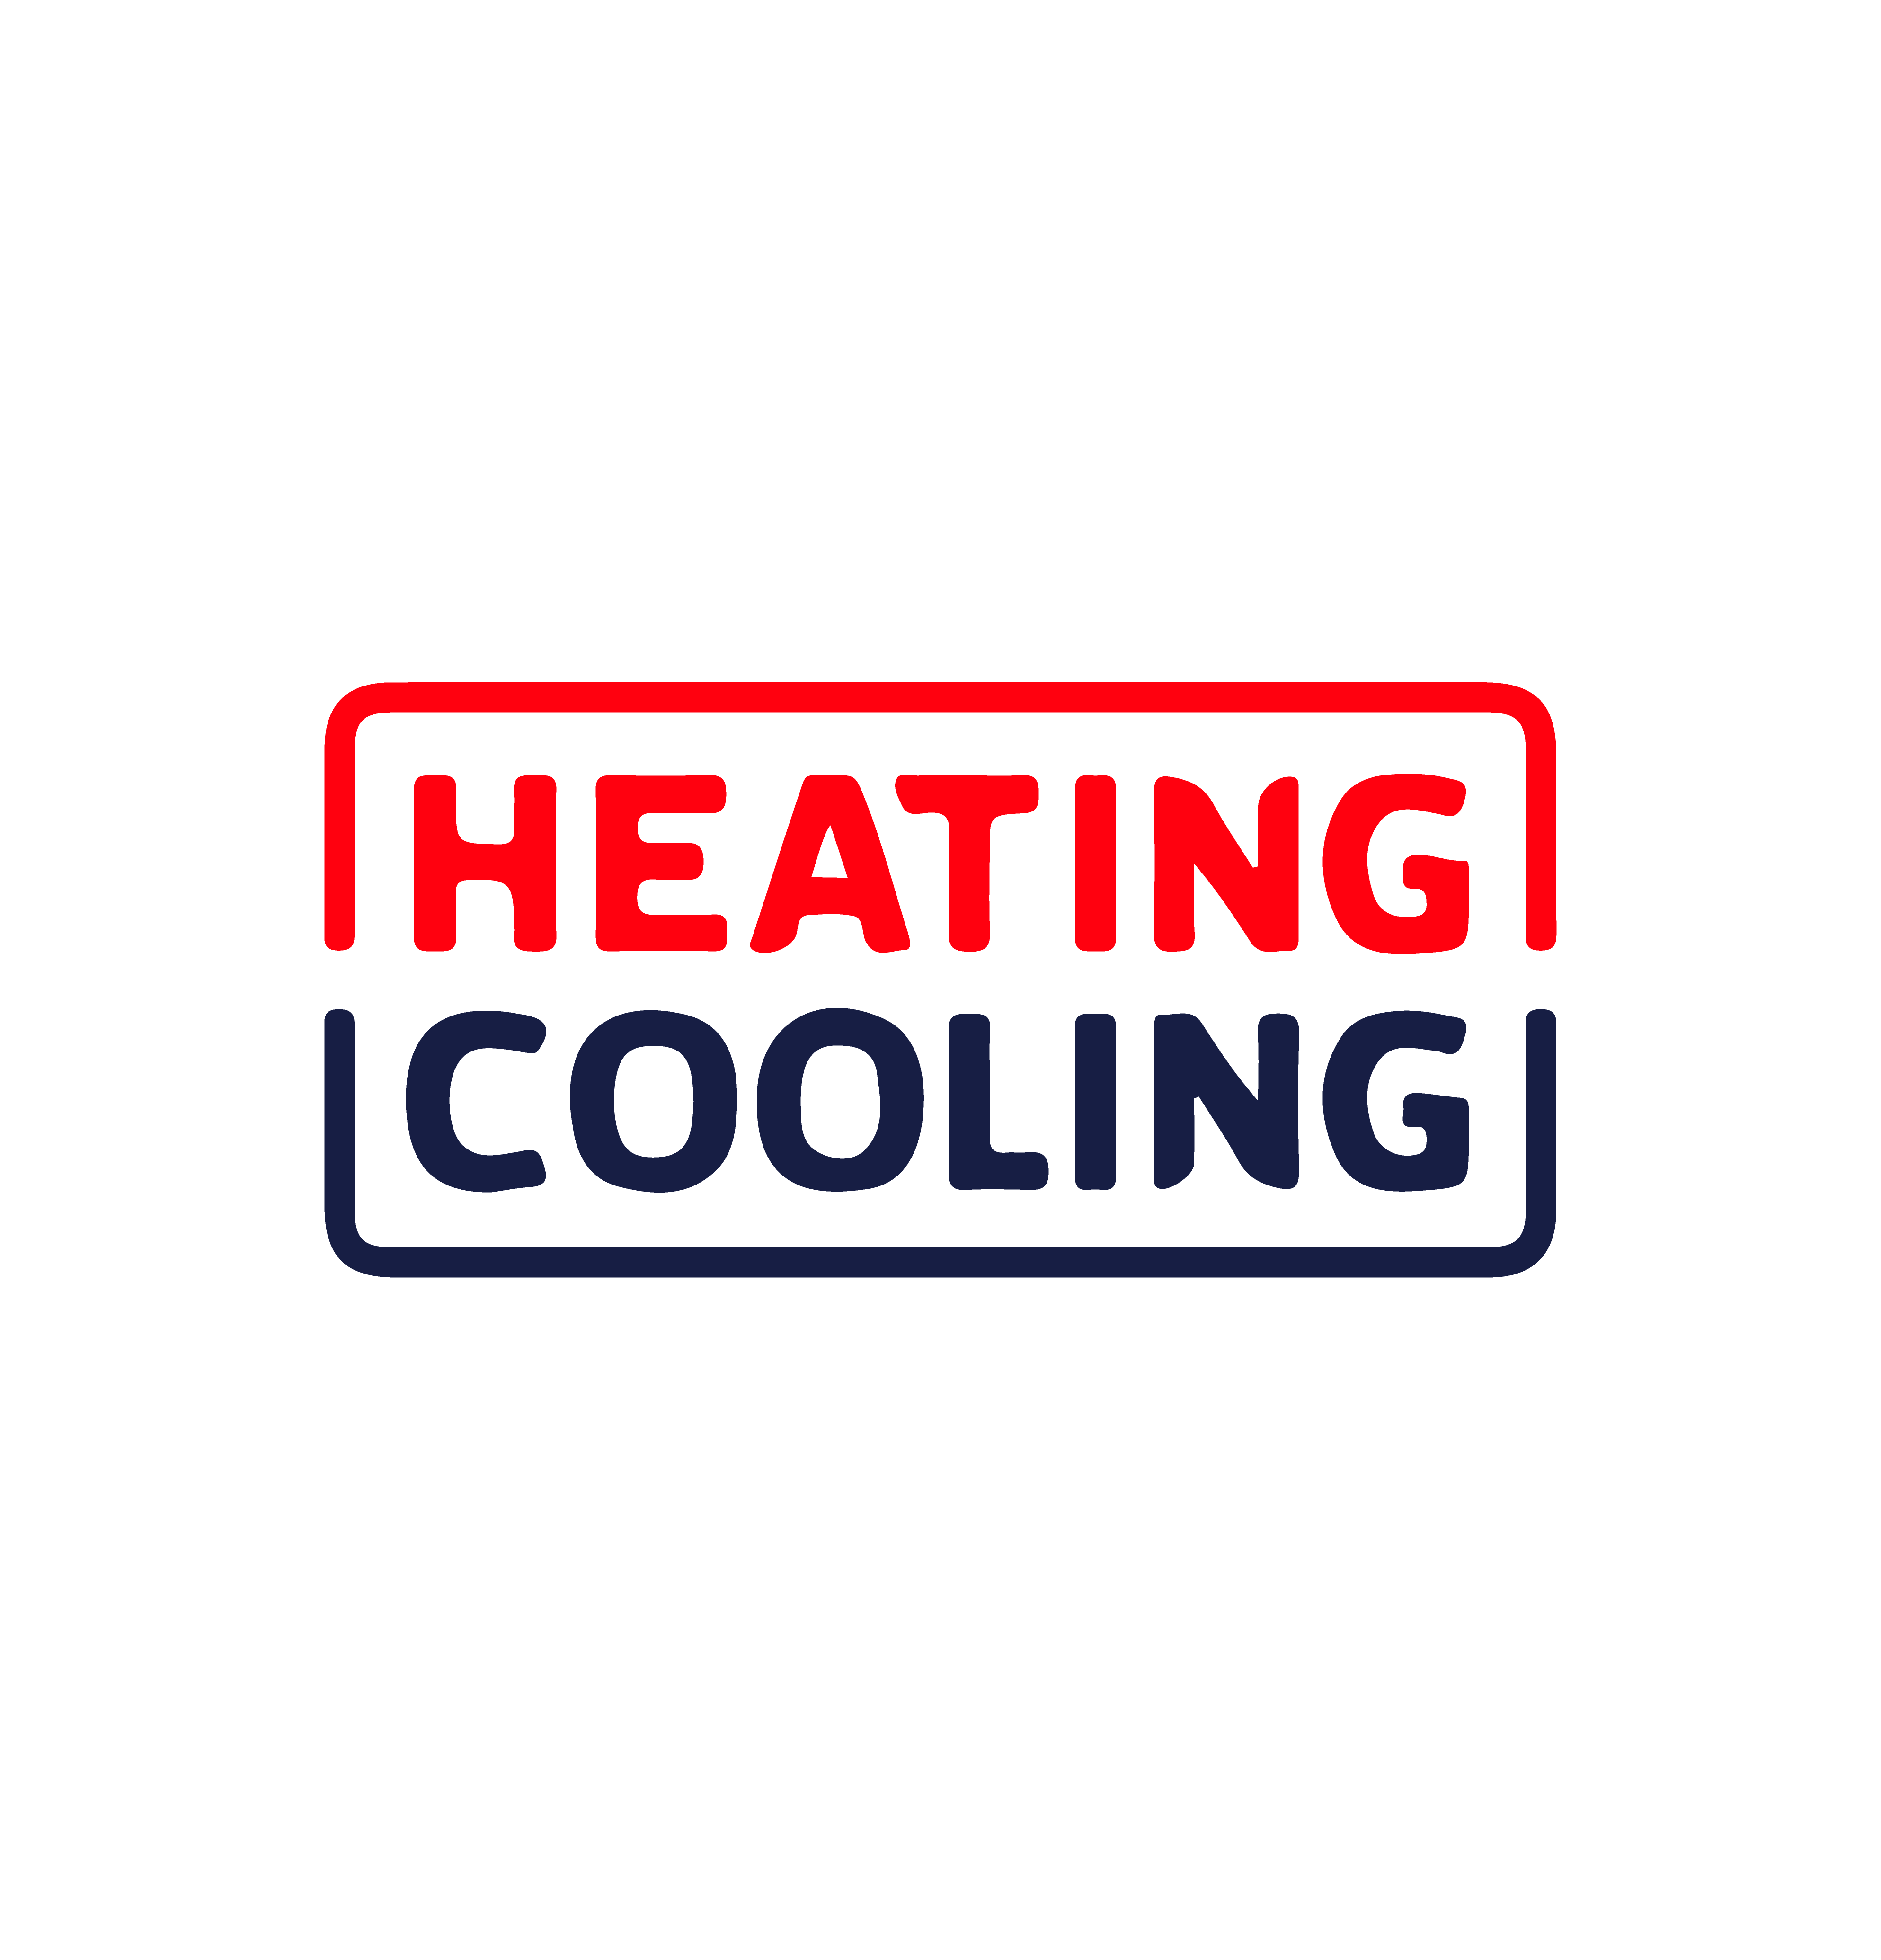 HEATING COOLING